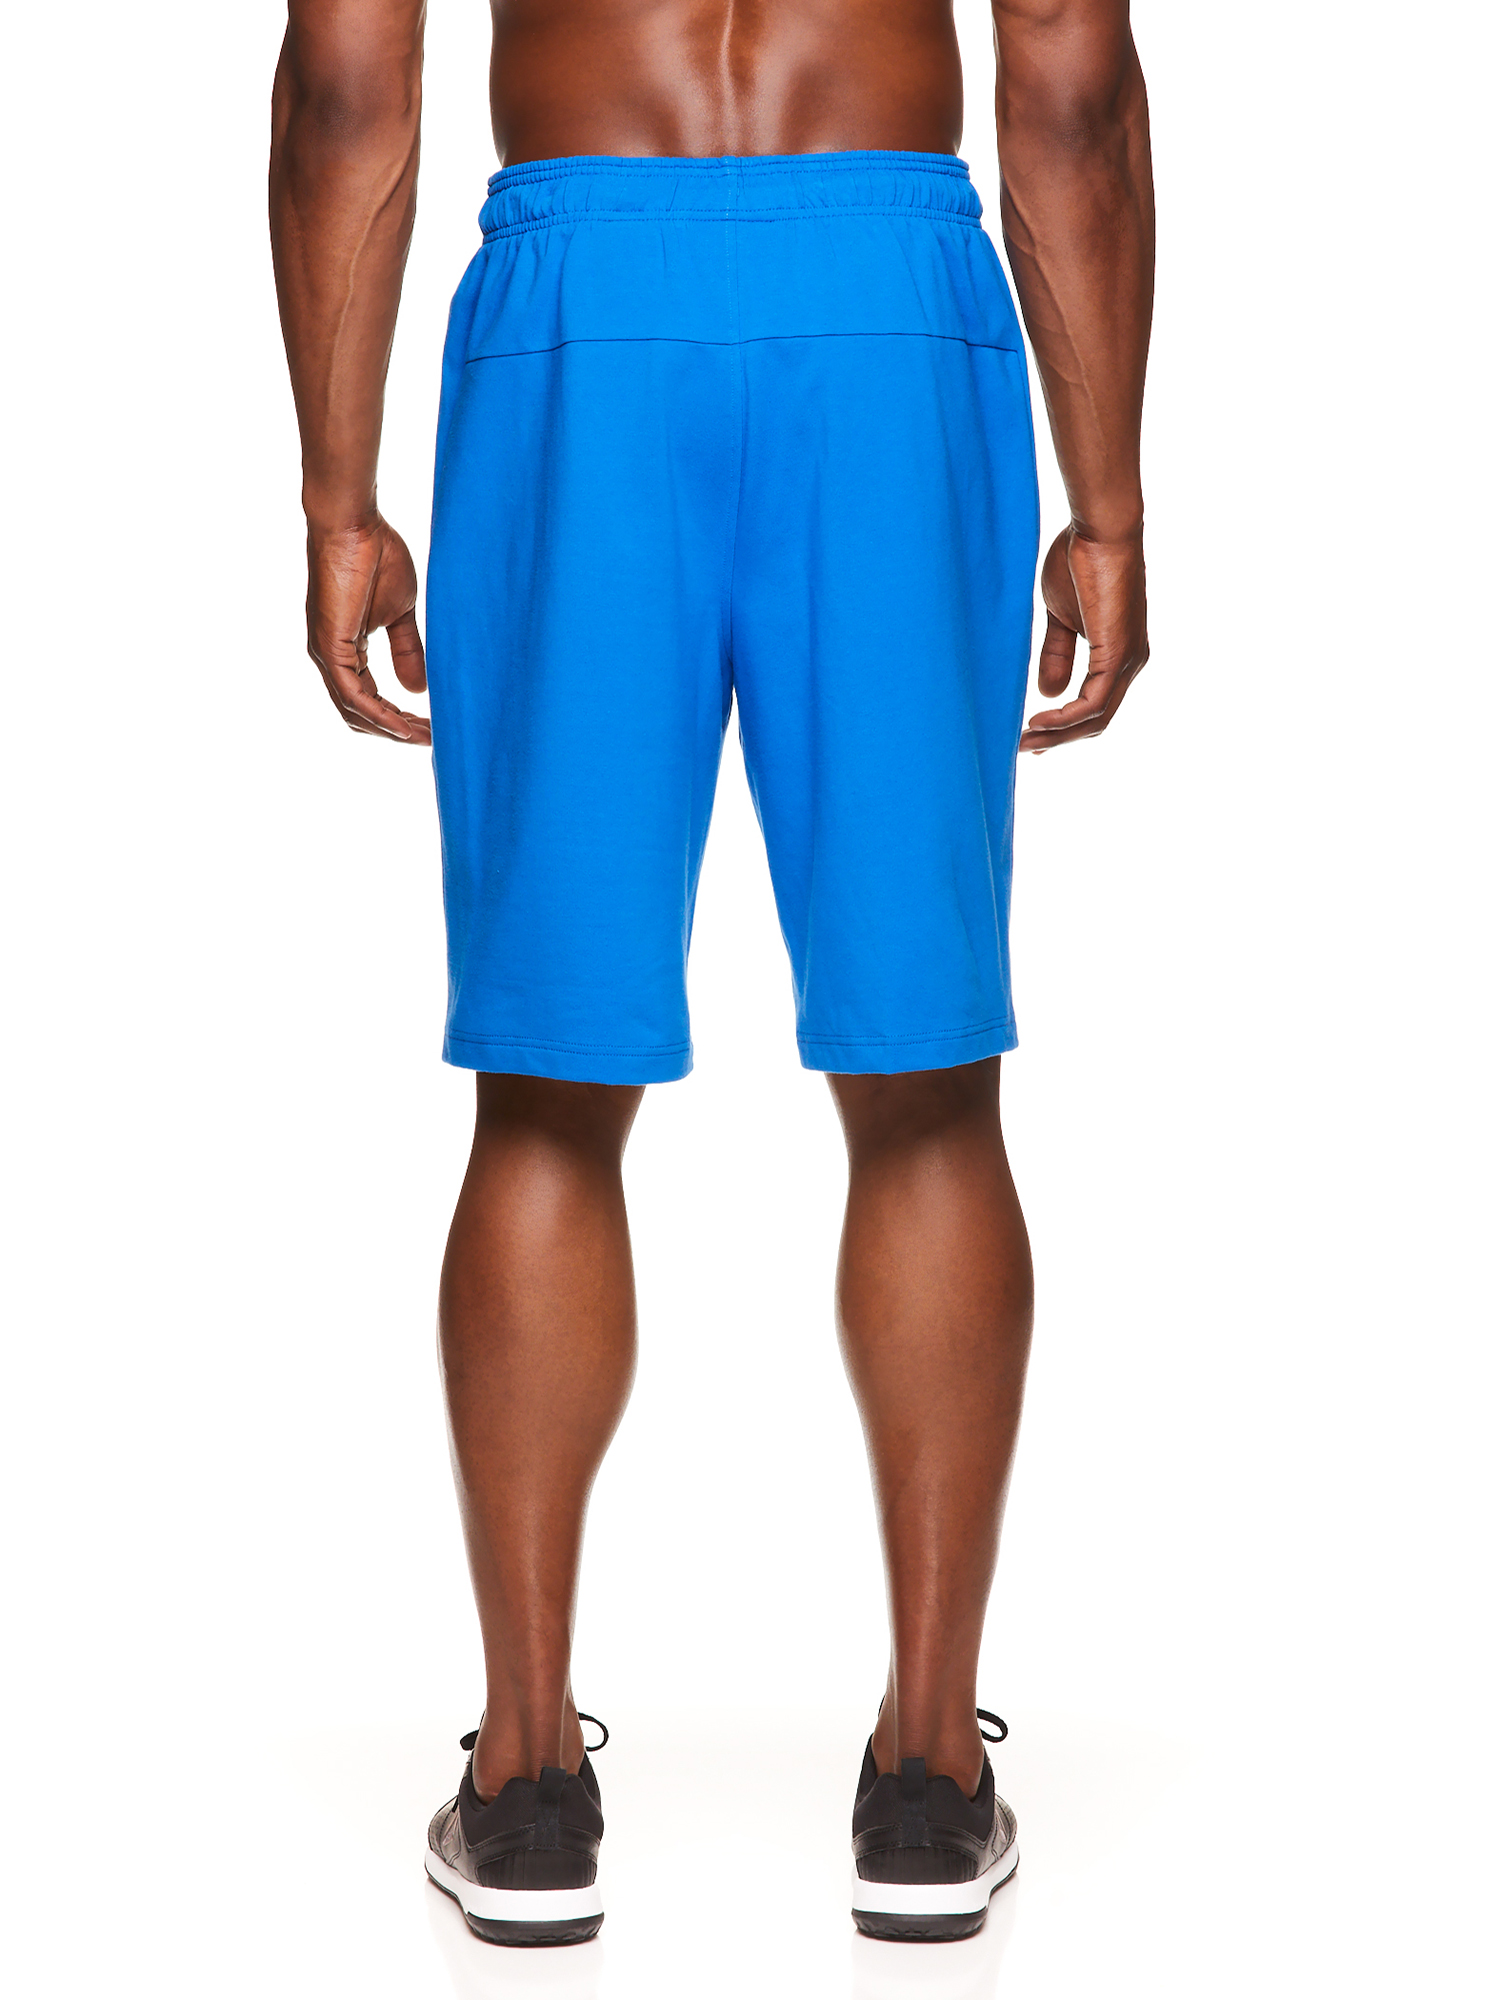 Reebok Men's and Big Men's Active Tech Terry Shorts, 10" Inseam Basketball Shorts, up to Size 3XL - image 2 of 4